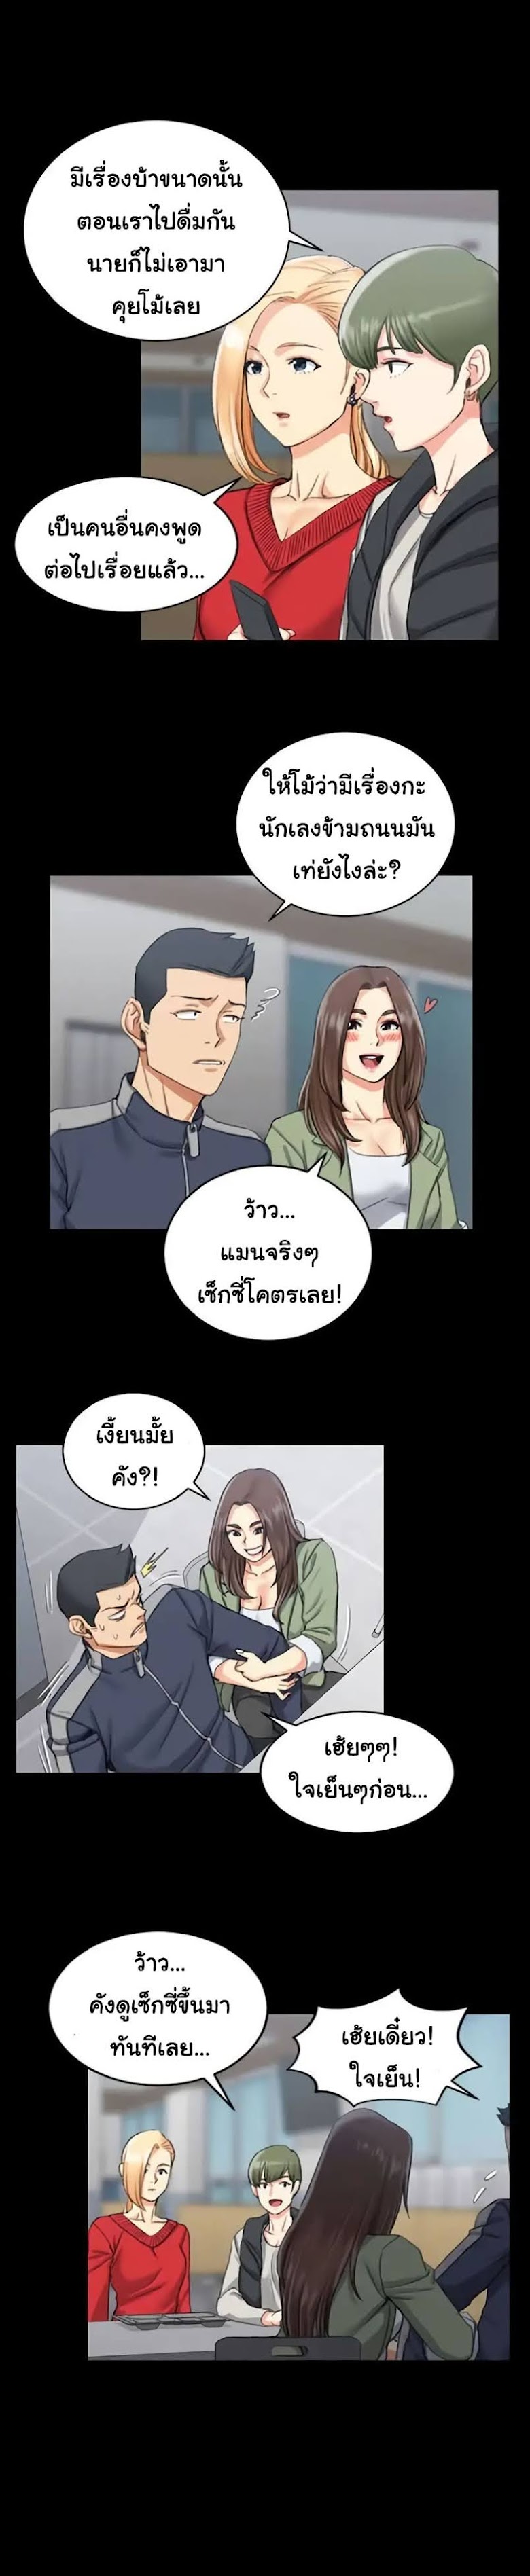 His Place - หน้า 1